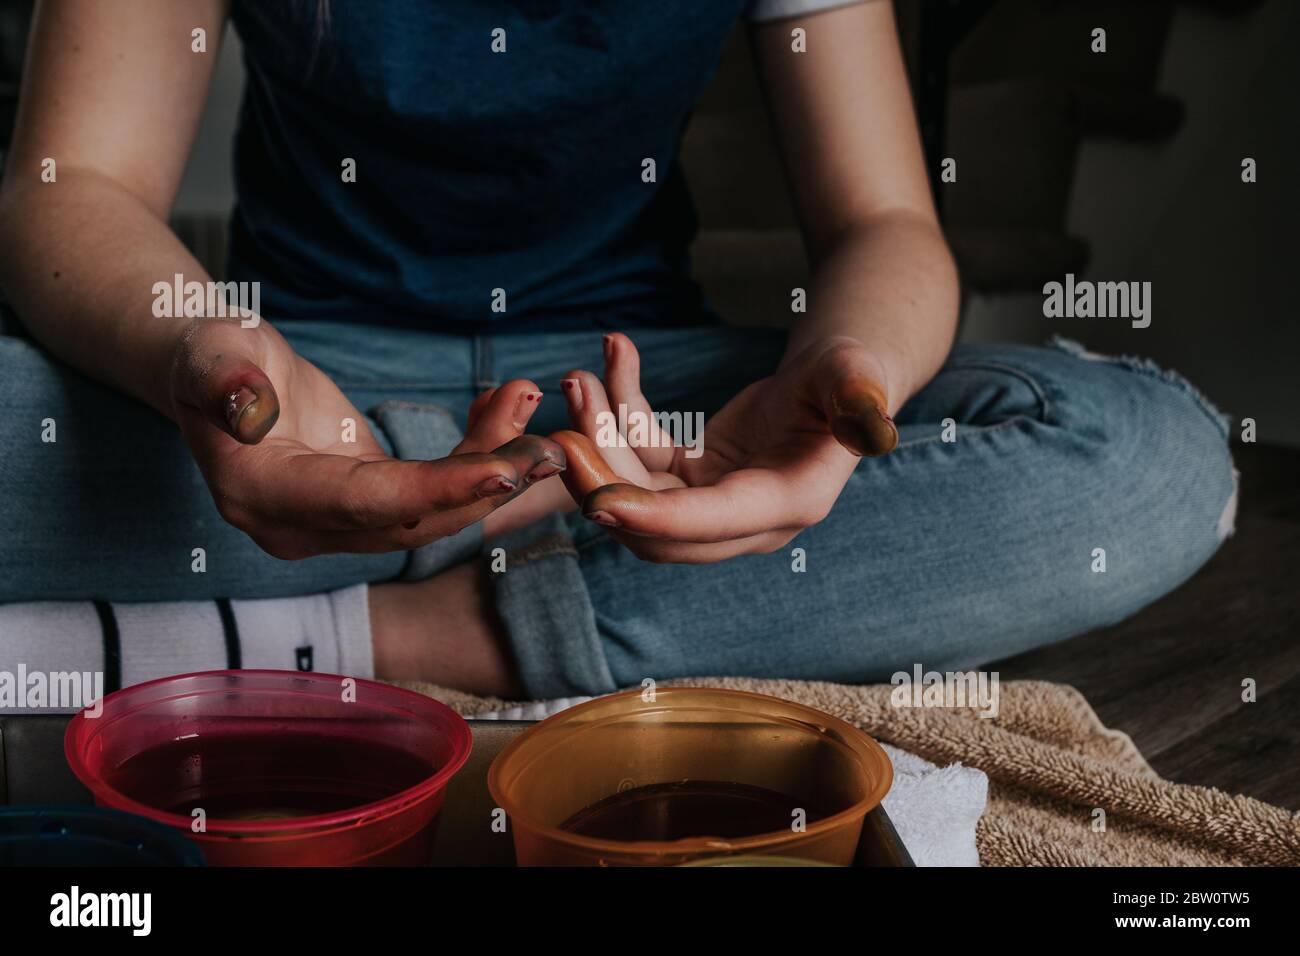 close up of preteen's hands while dying chicken eggs Stock Photo